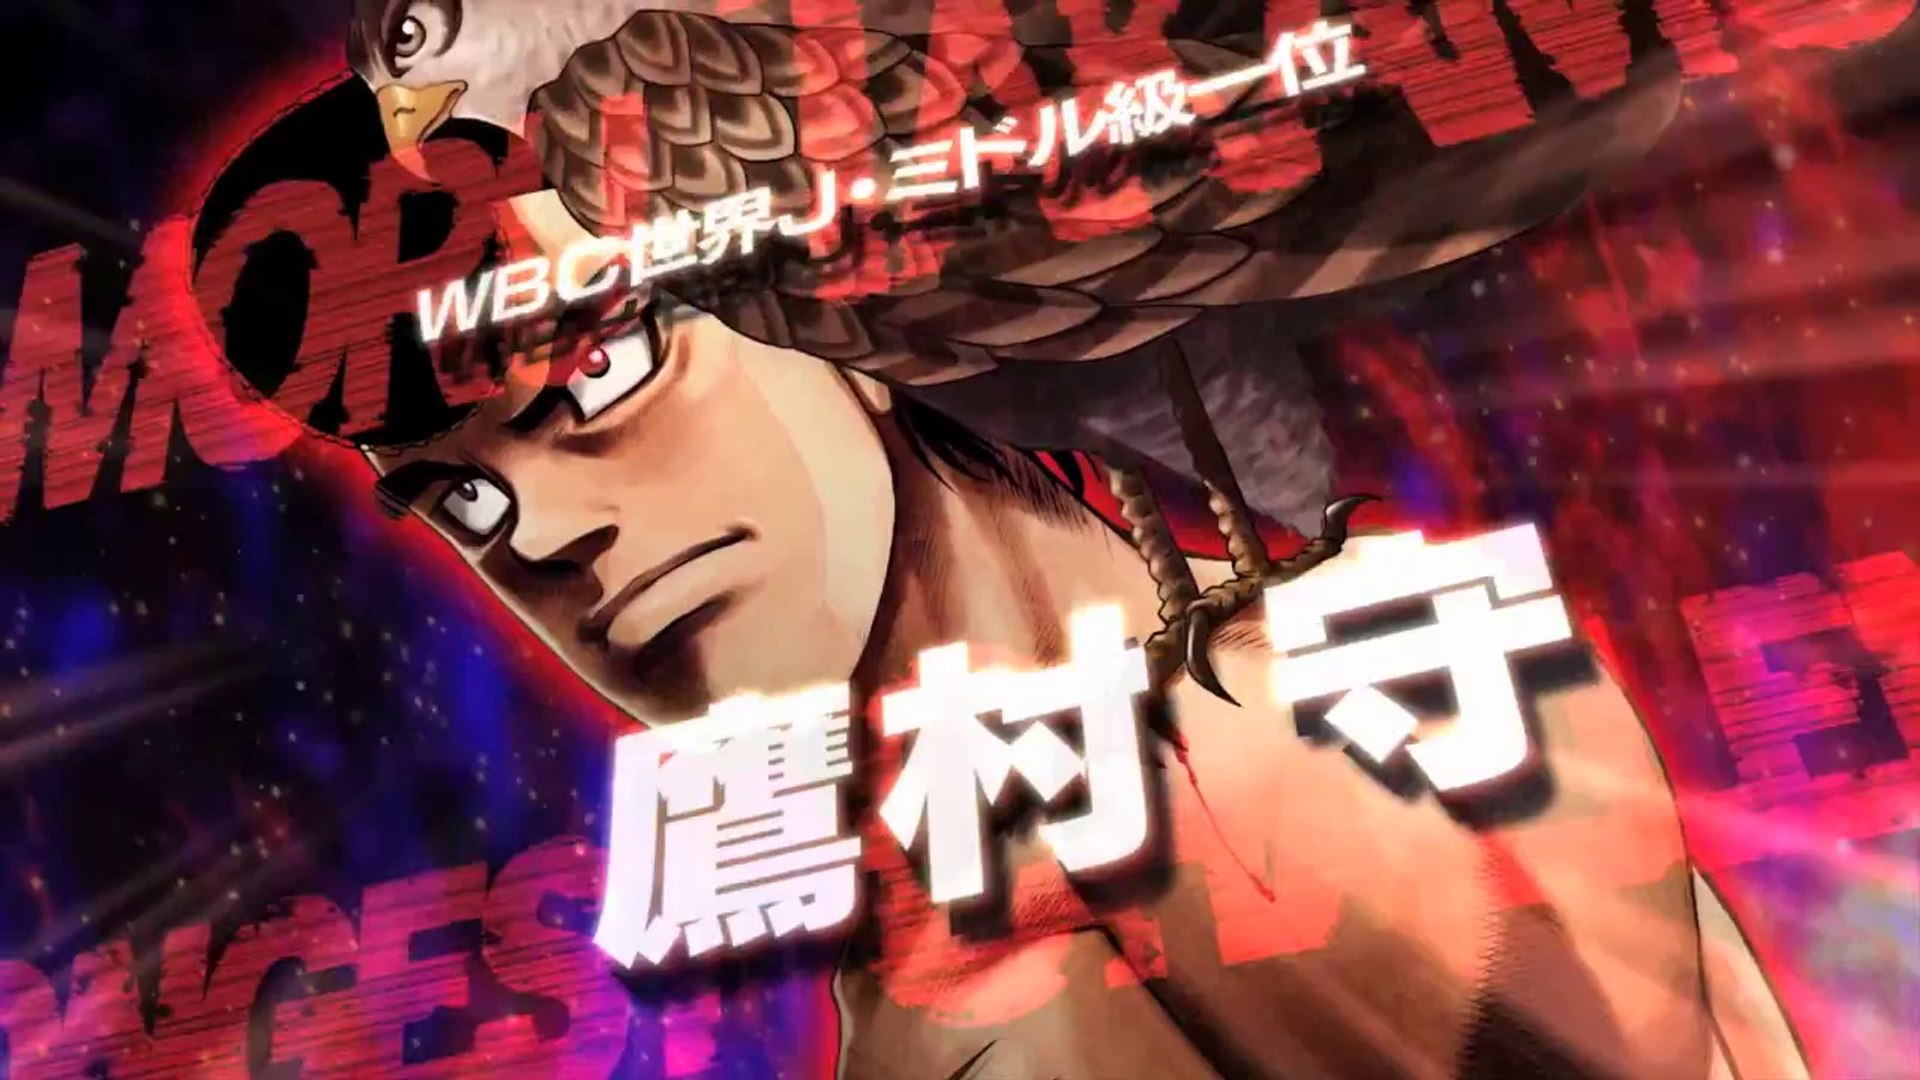 Ps3 Hajime No Ippo The Fighting Gameplay Trailer Hd Video Dailymotion